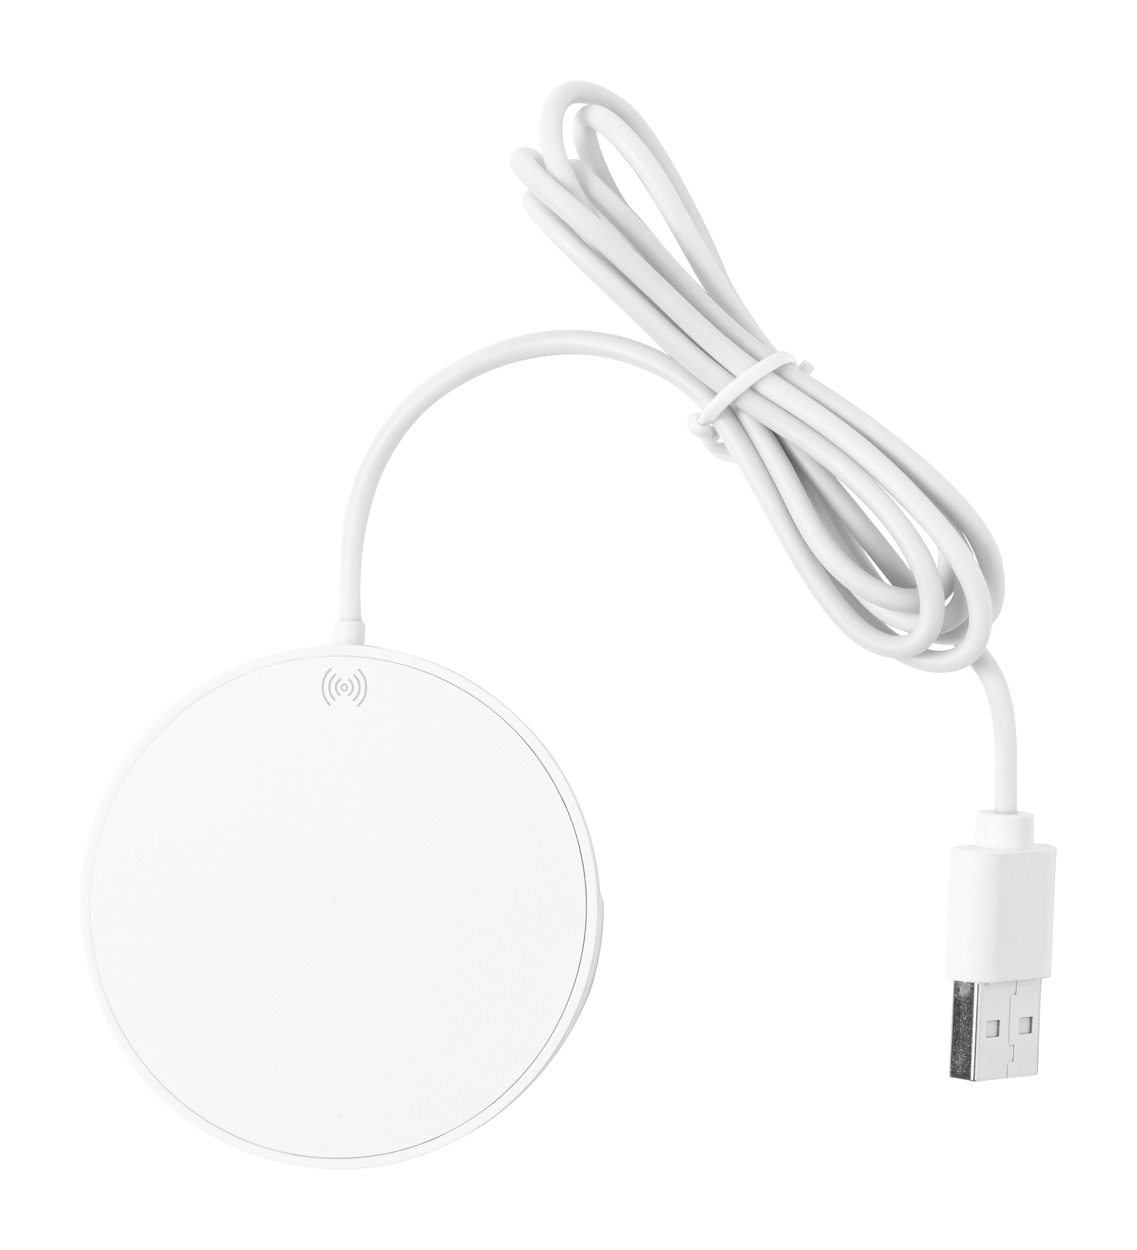 Promo Dixlem RABS magnetic wireless charger